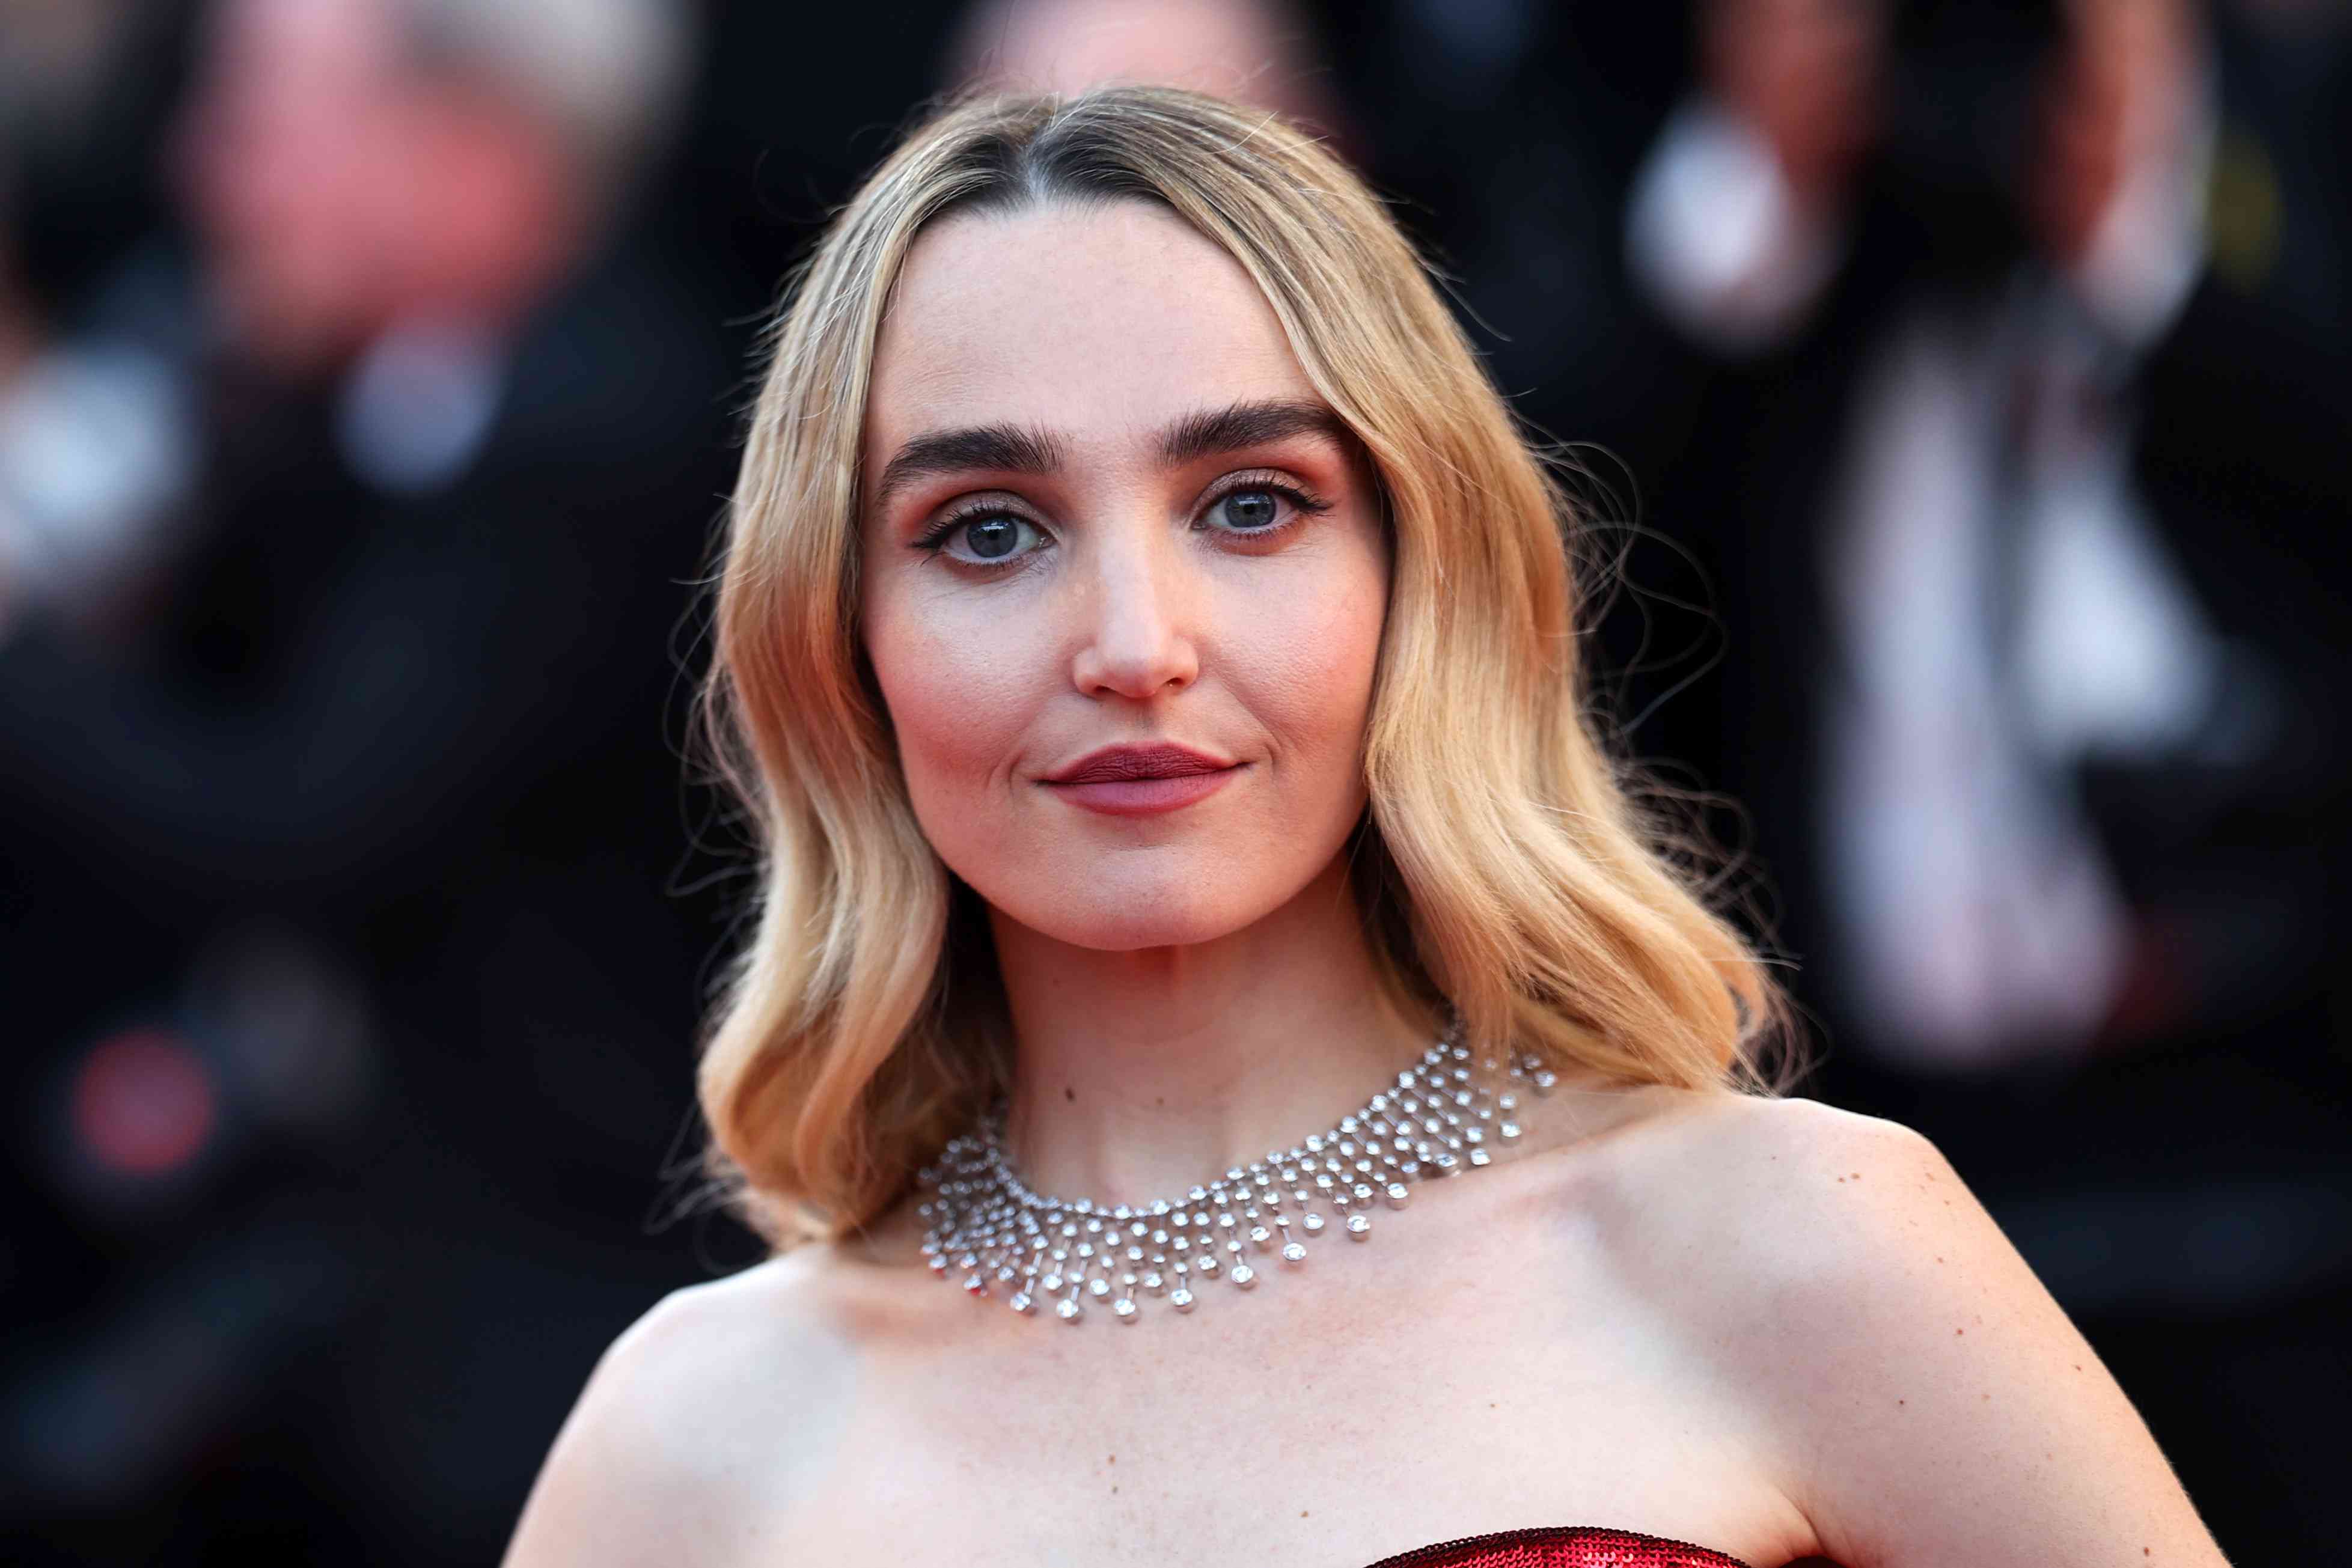 Chloe Fineman Clapped Back at Critics Saying Her Cannes Dress Made Her Look "Like a Bobble Head"